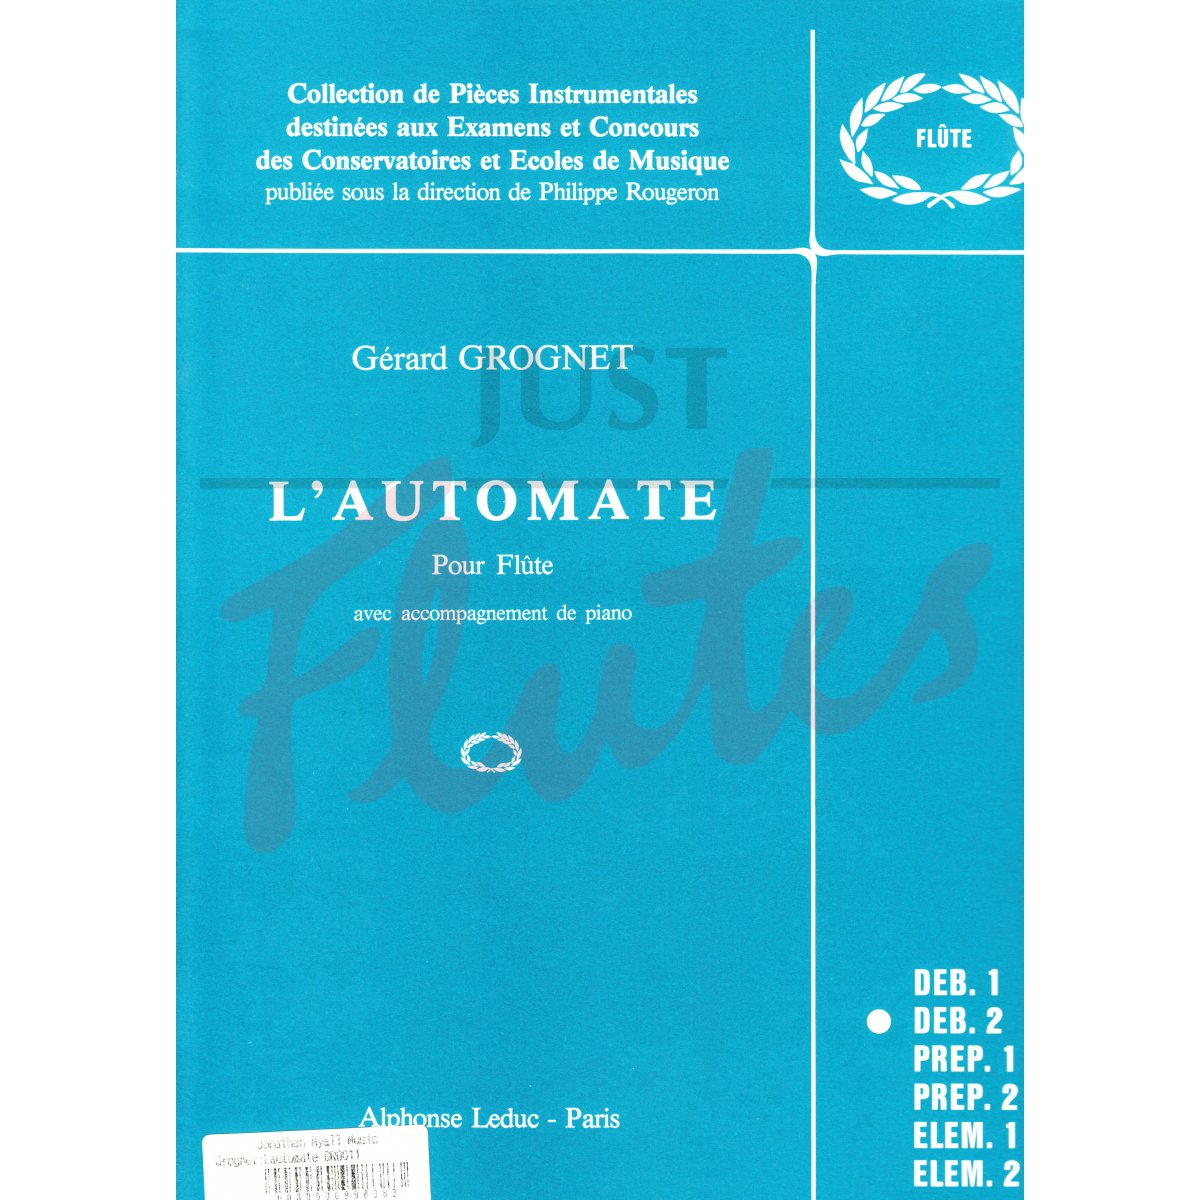 L'Automate for Flute and Piano